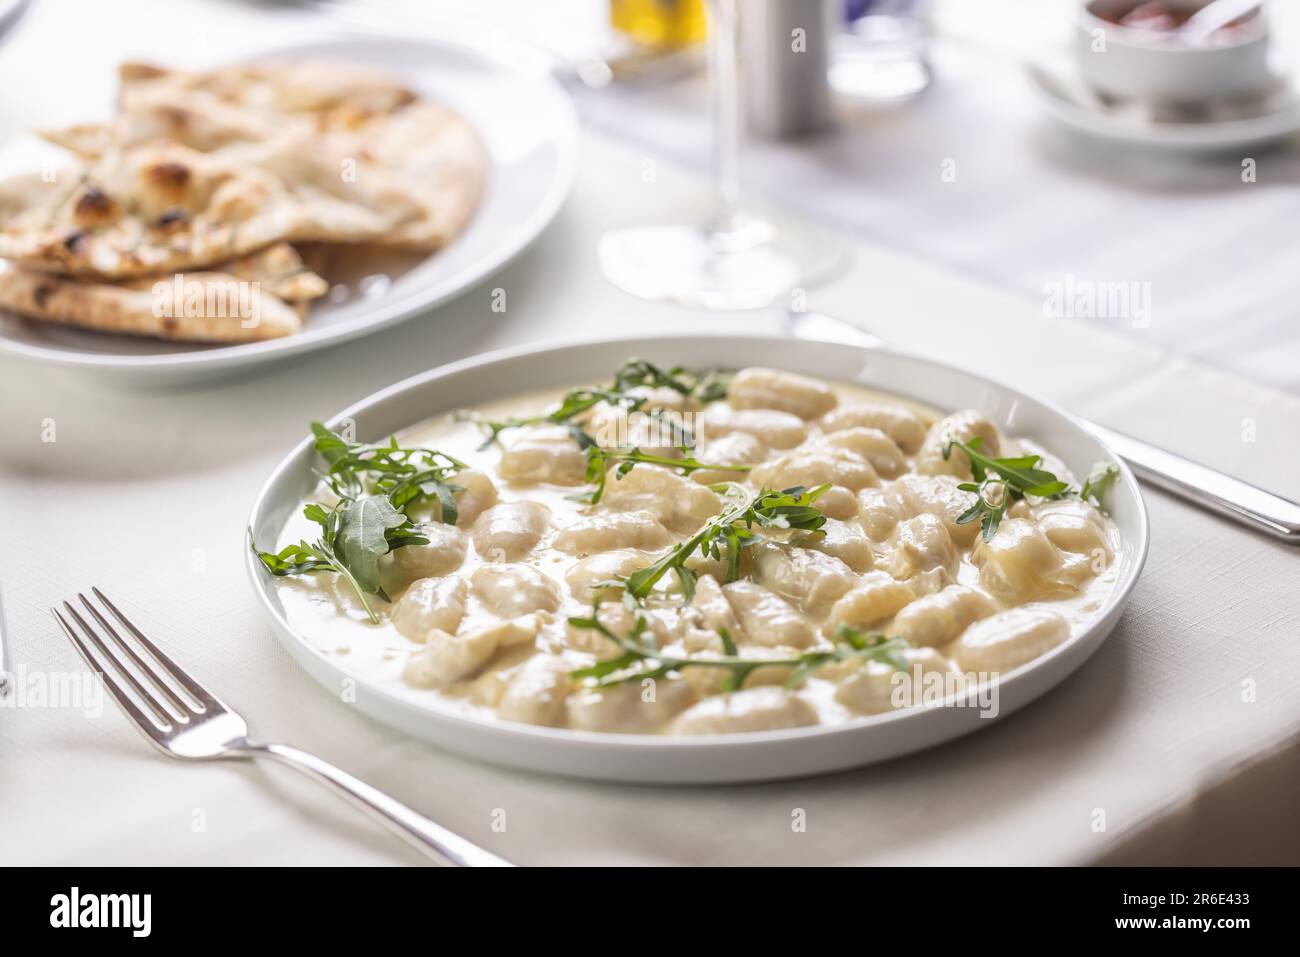 Italian gnocchi ai quatro formaggi with pizza bread on the side served on a table. Stock Photo